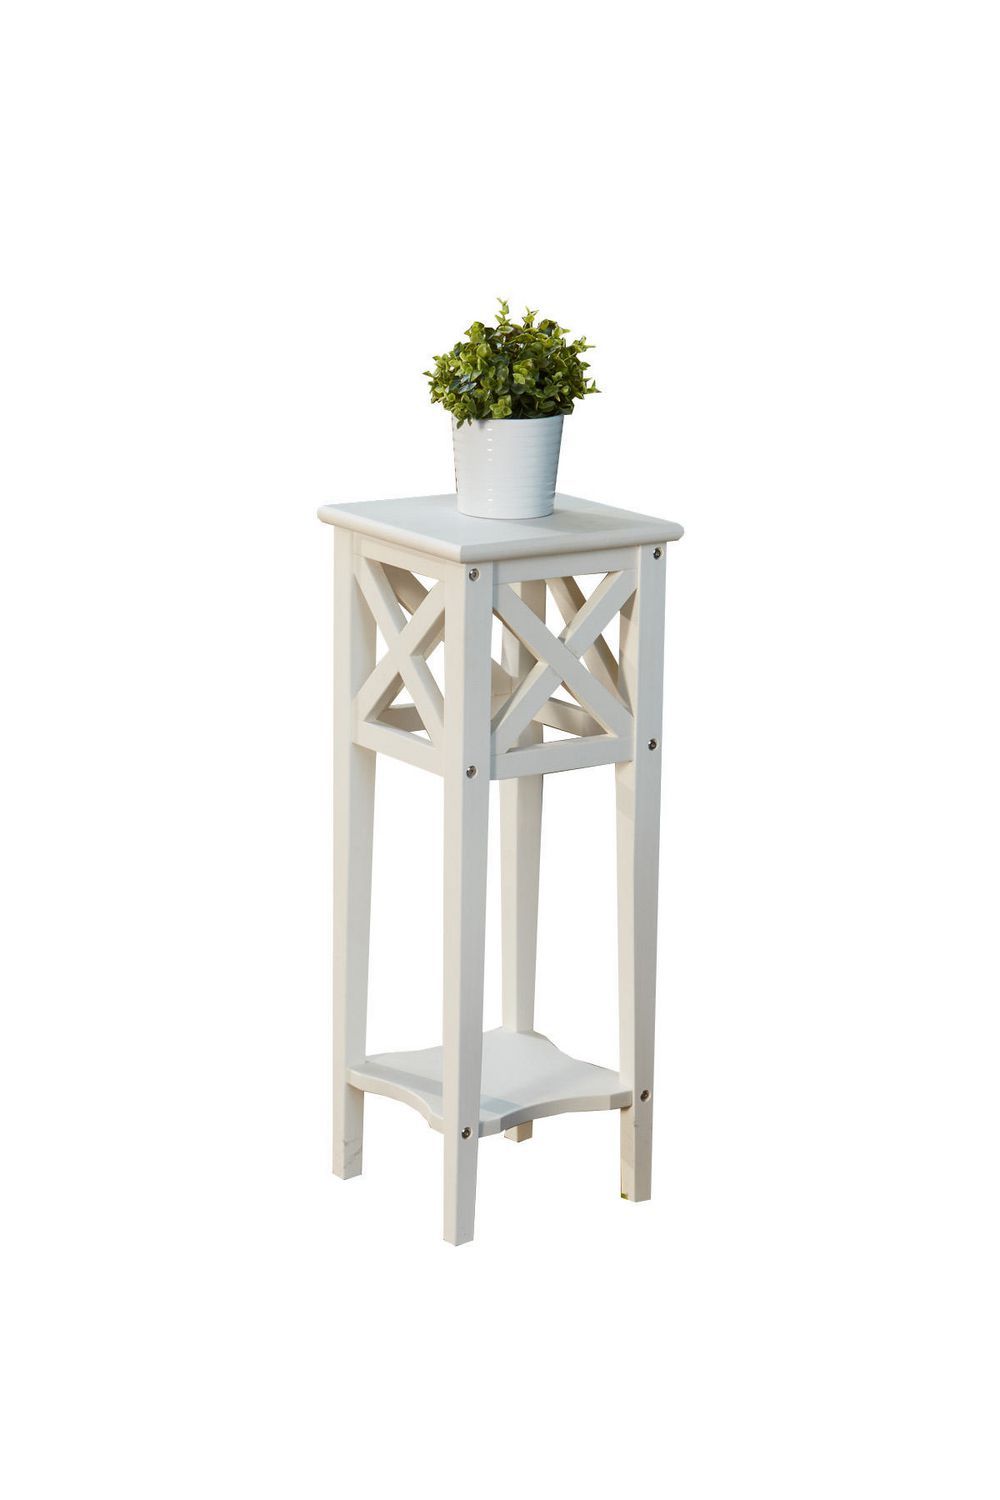 Leisure Design White Ivy Plant Stand | Walmart Canada For Ivory Plant Stands (View 7 of 15)